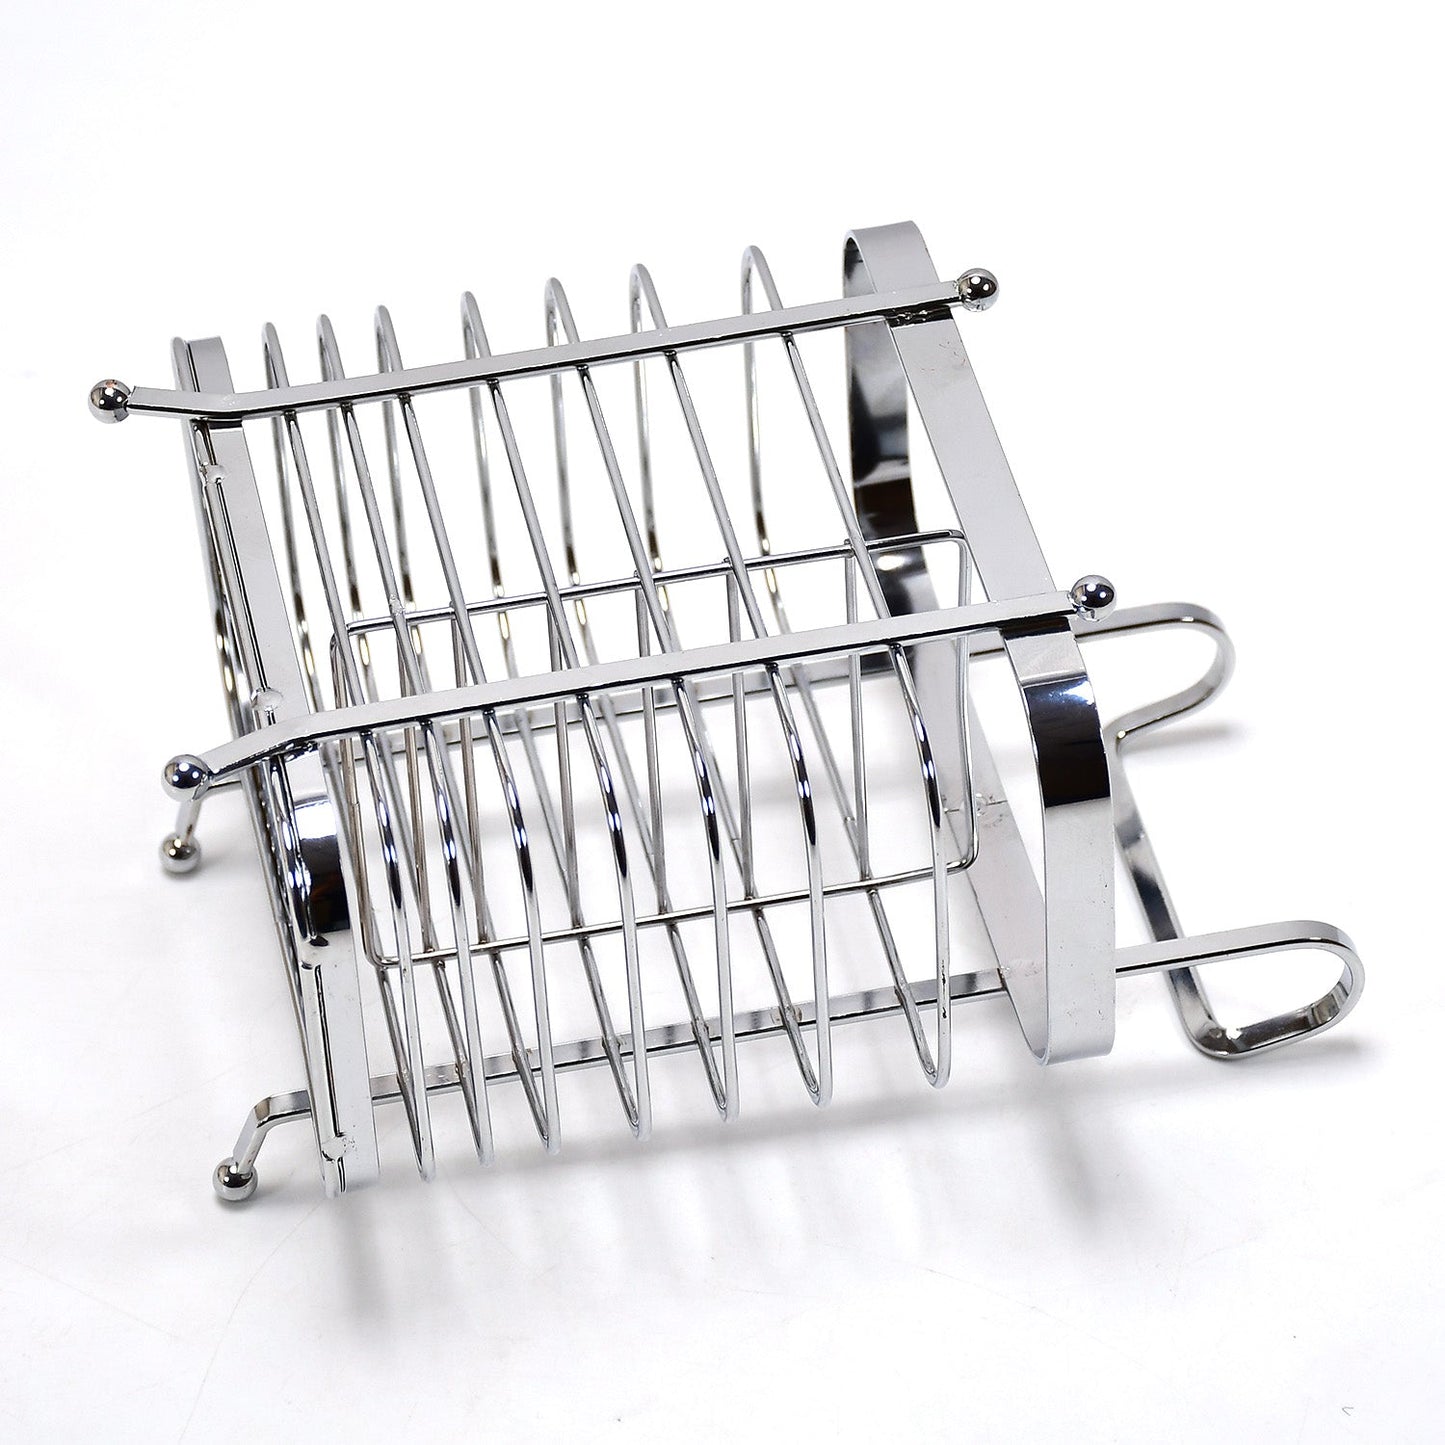 5118 Stainless Steel and Plastic Hanging and Stand Utensil Drying Rack DukanDaily